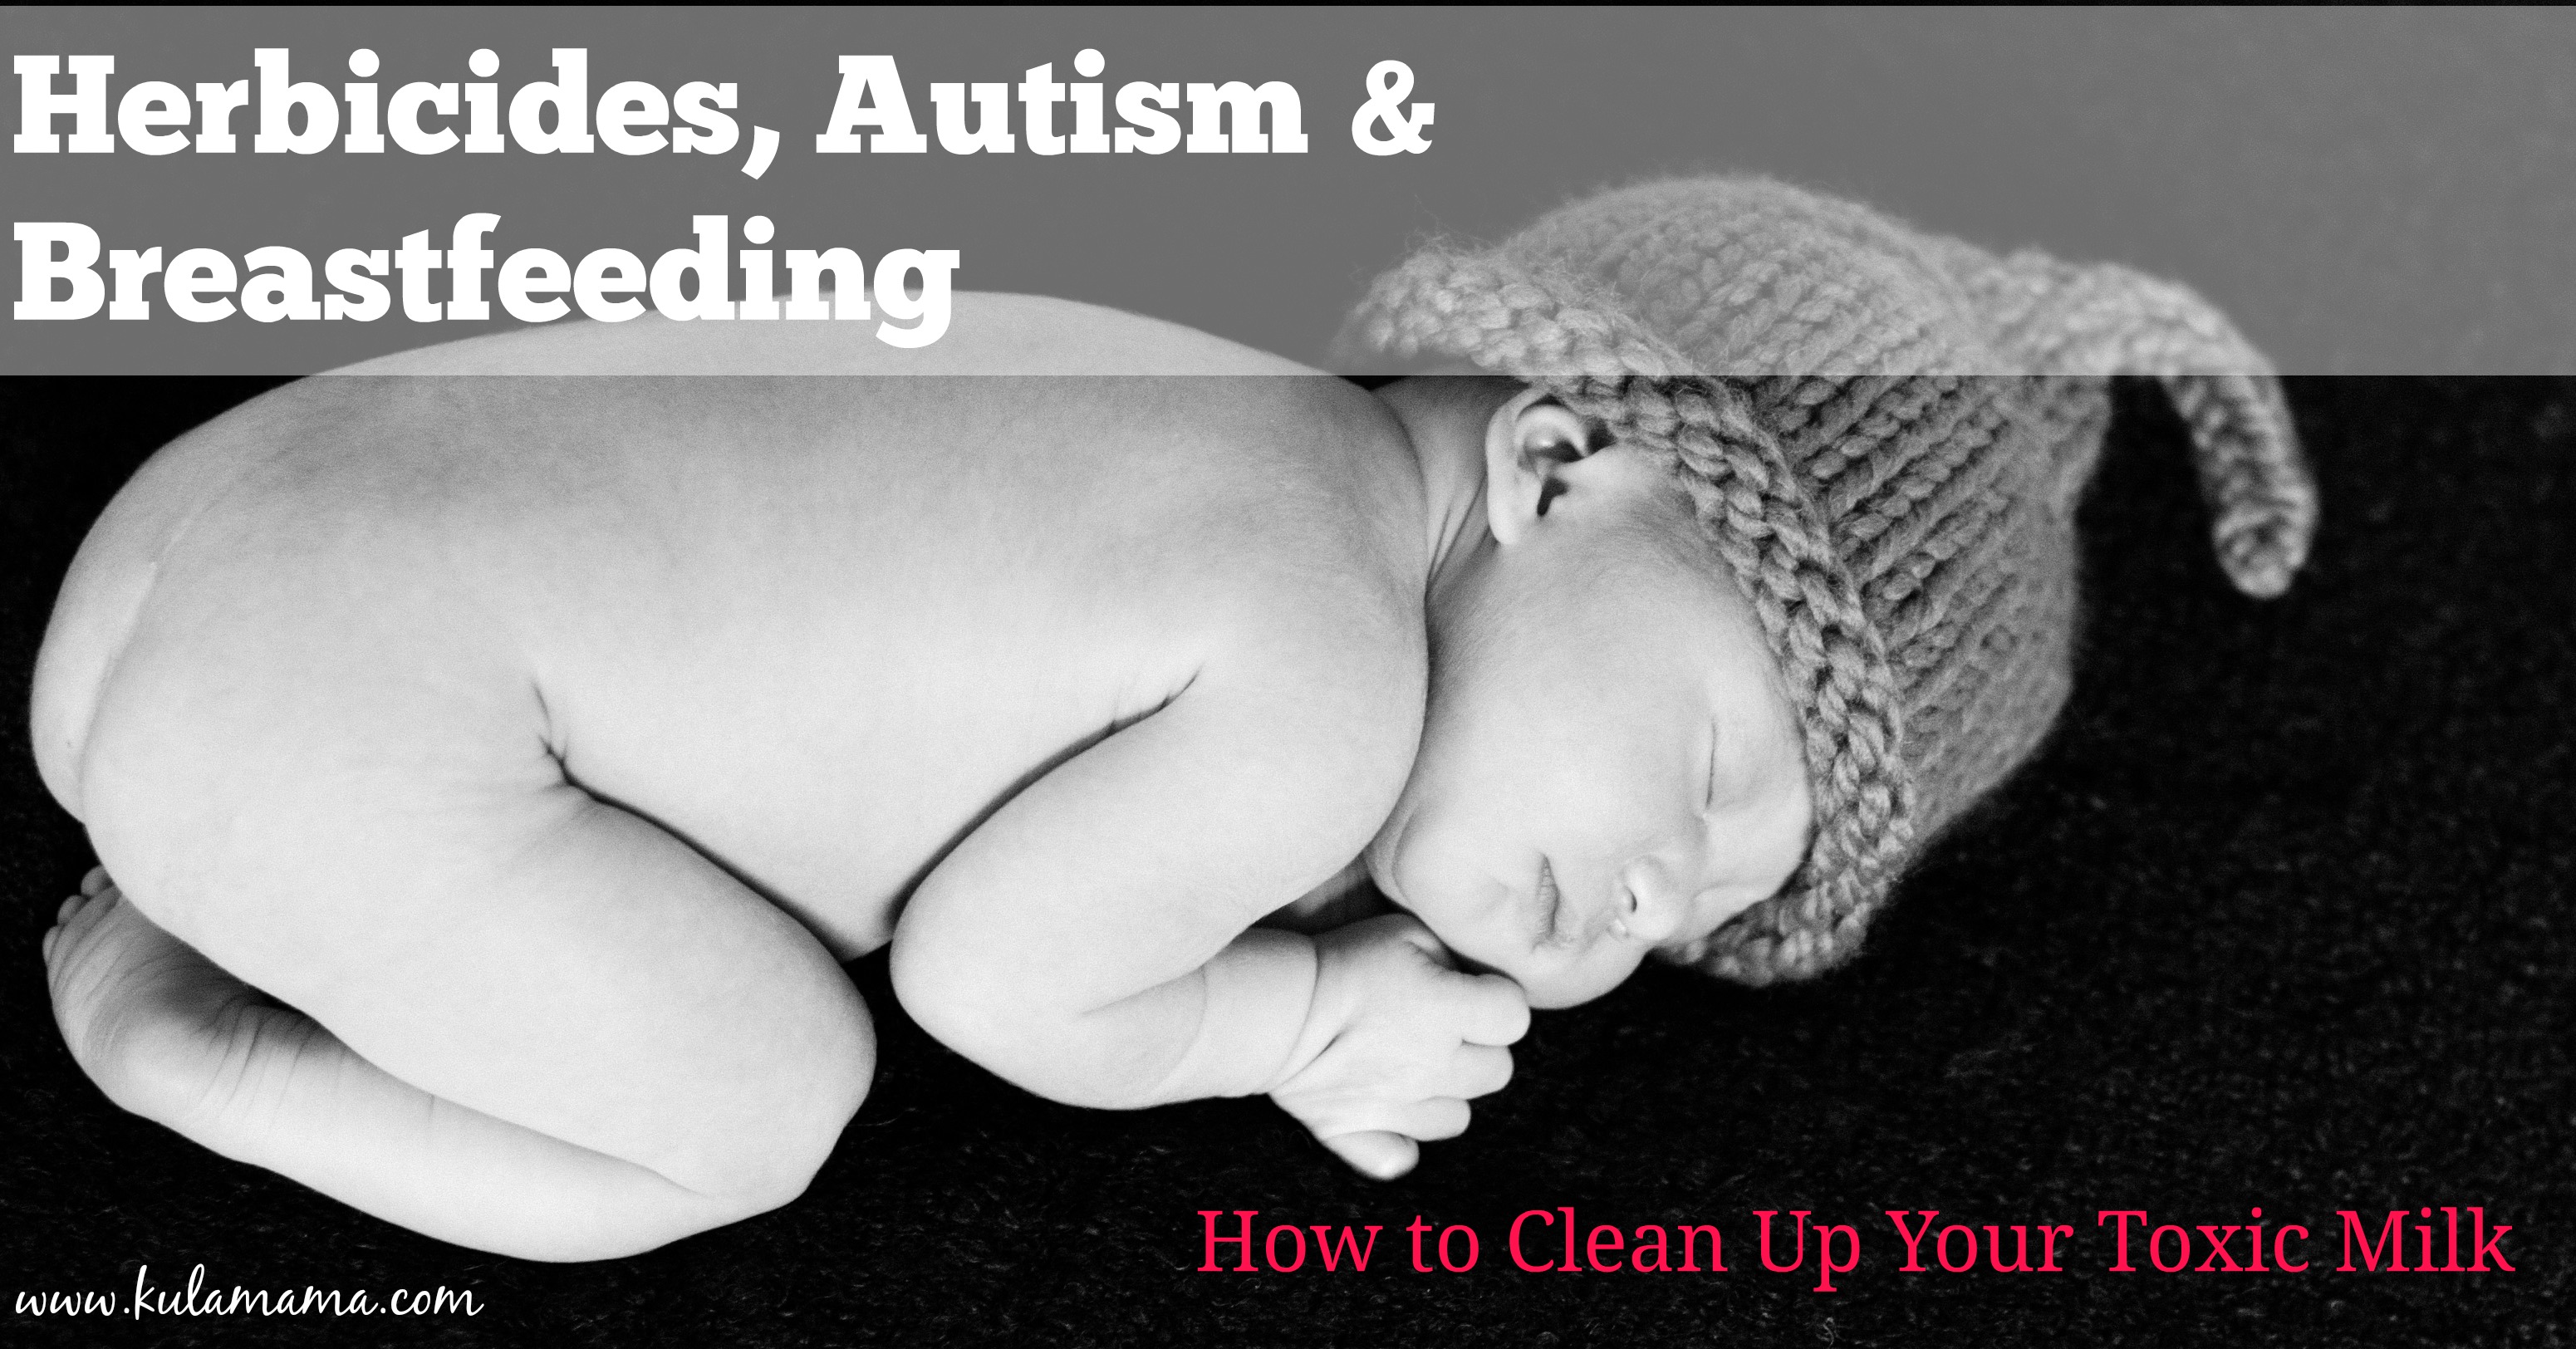 Herbicides, Autism and Breastfeeding:  How to Clean Up Your Toxic Milk